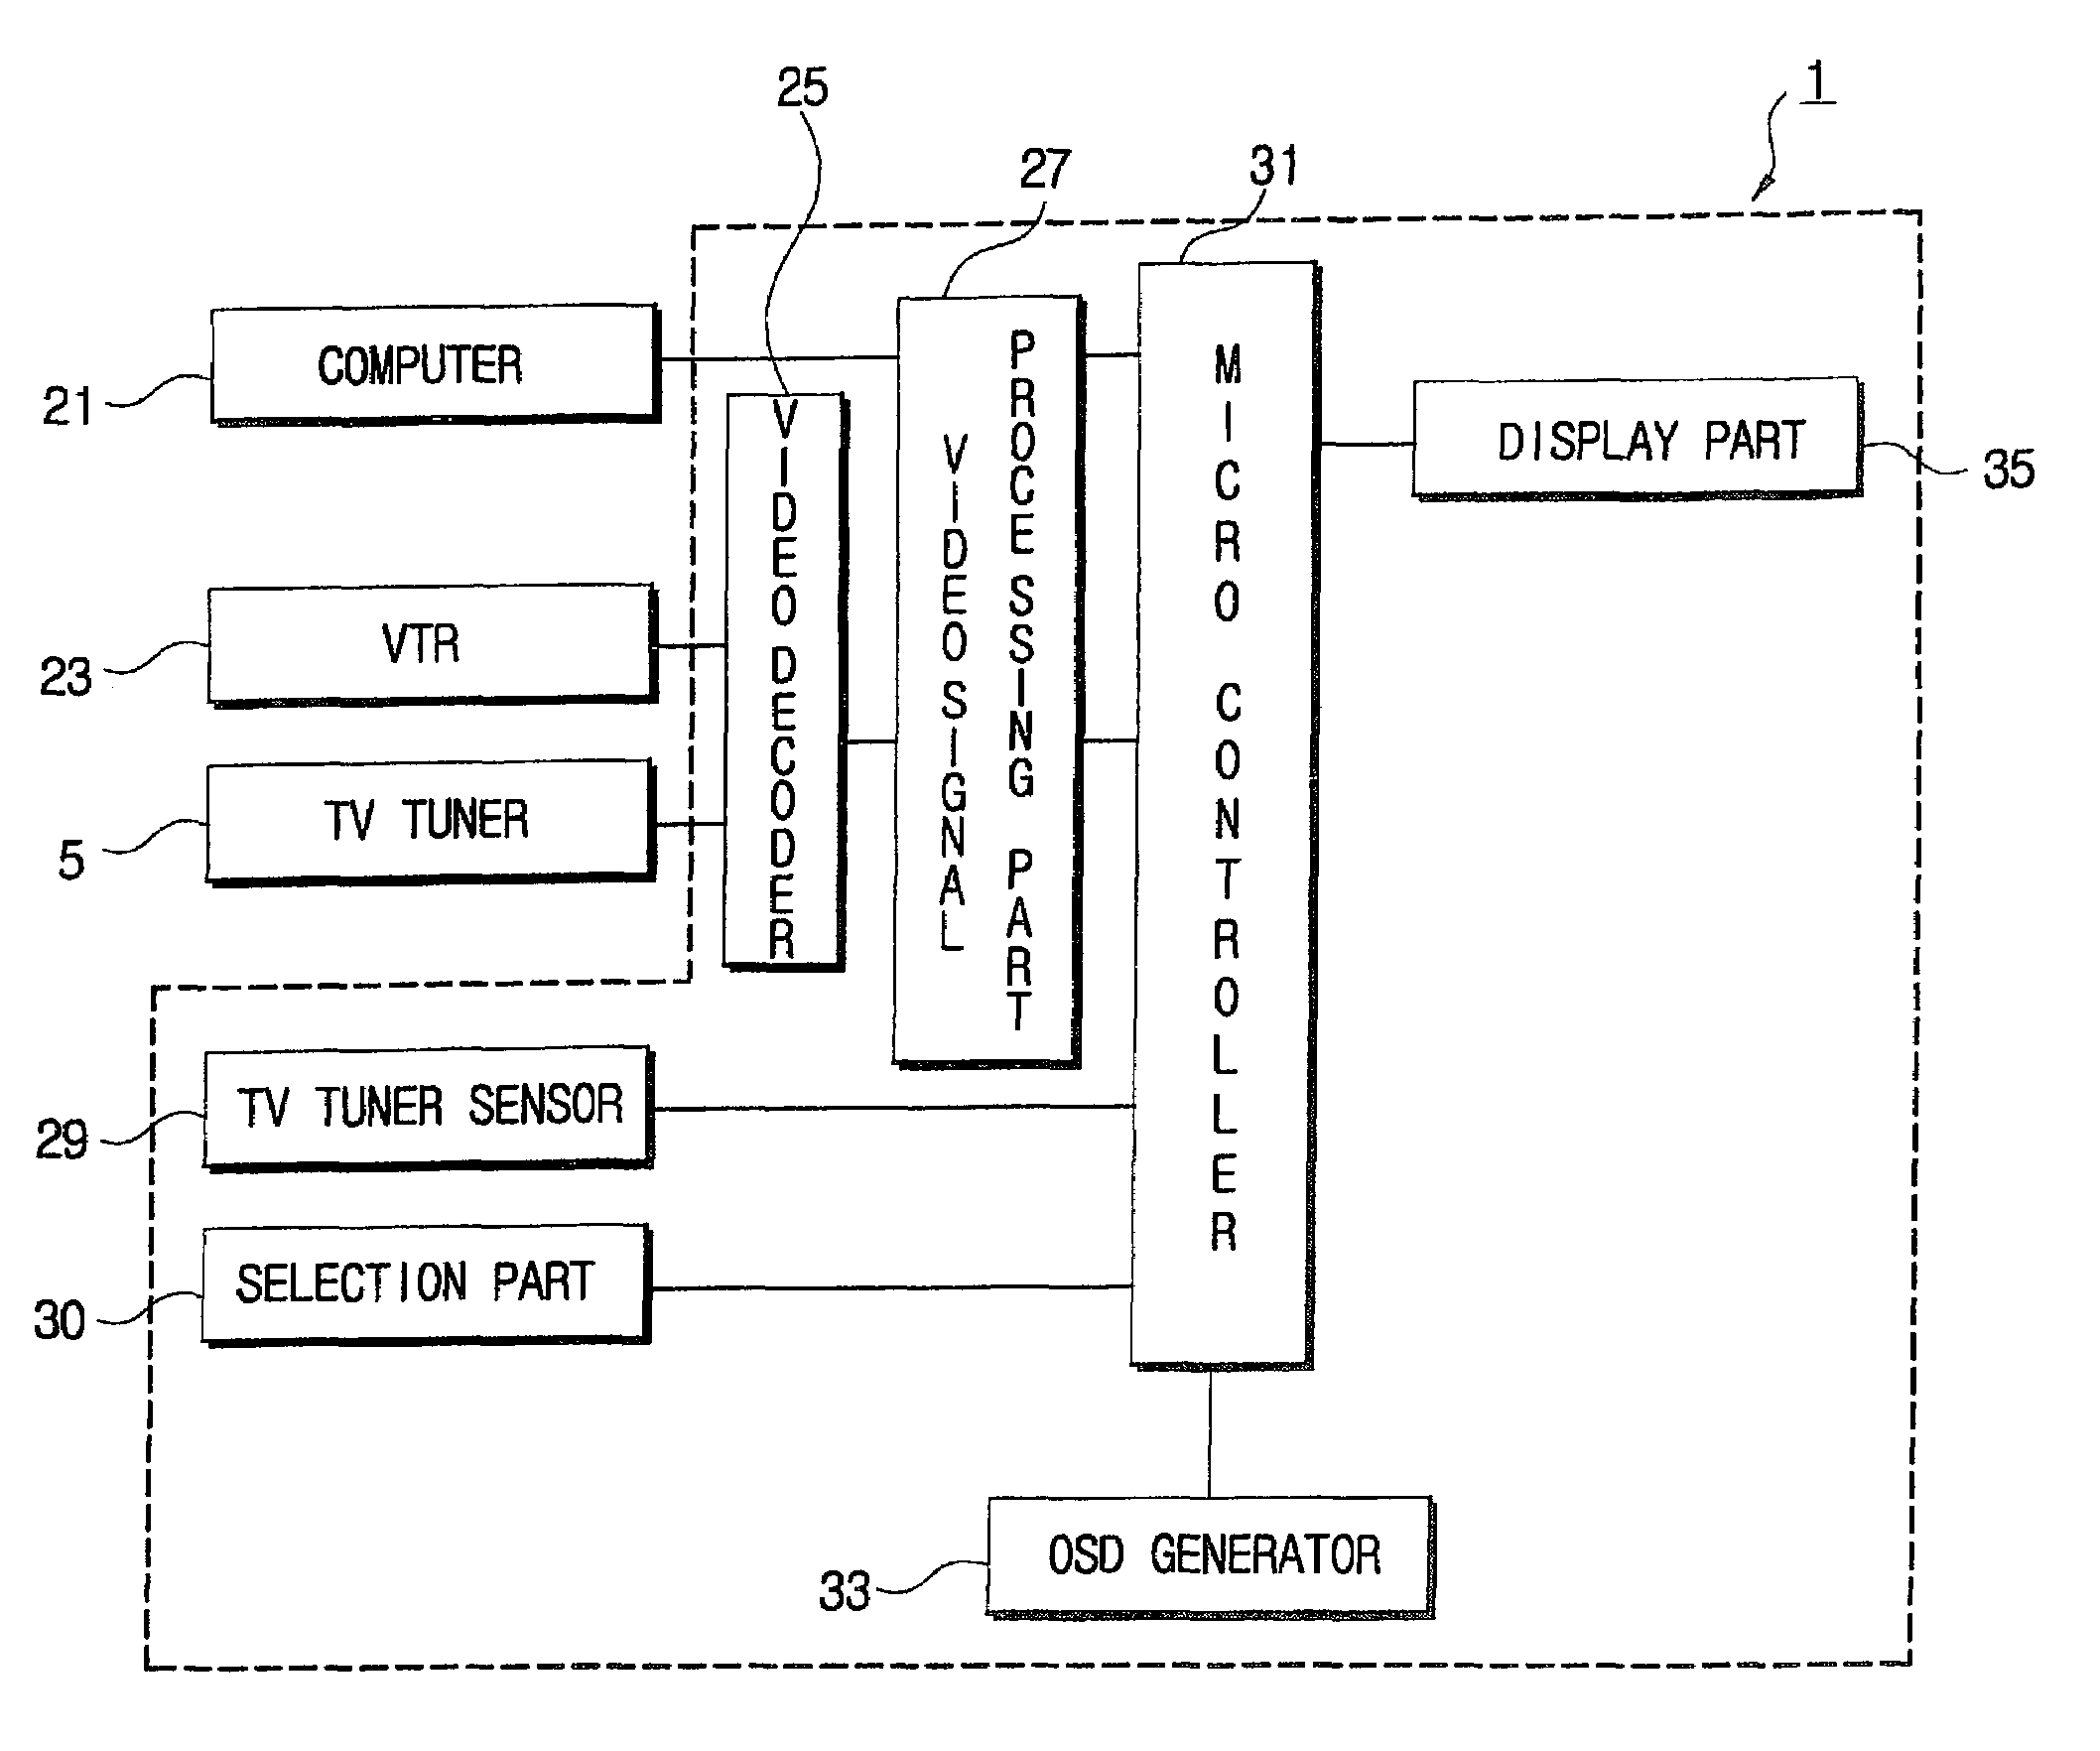 Display apparatus and method of controlling the same